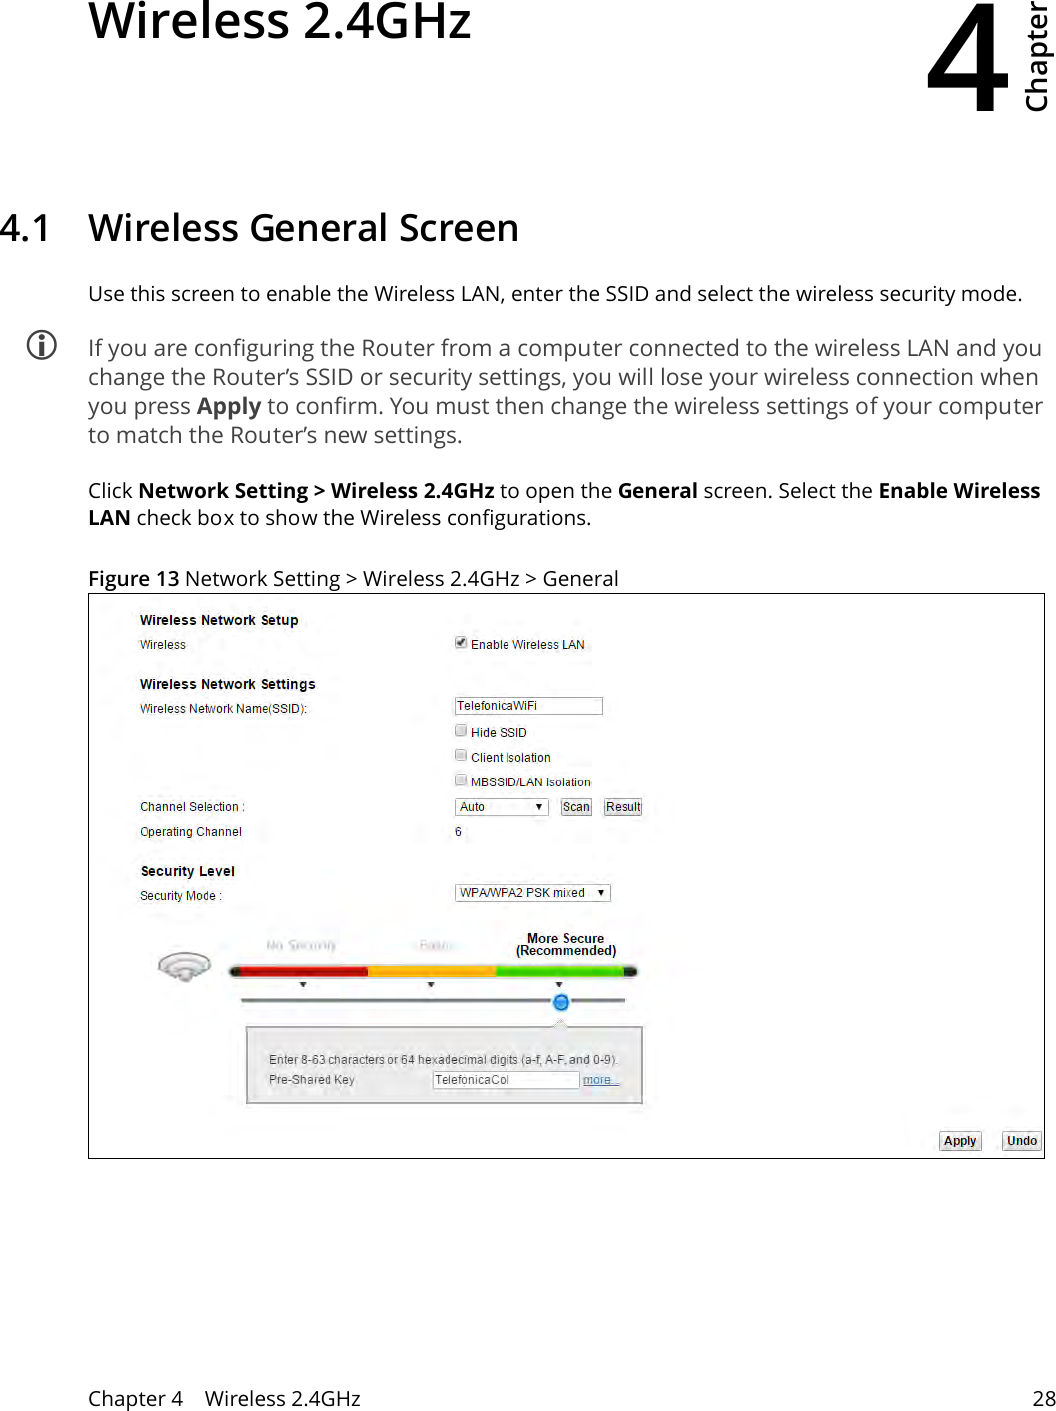 4Chapter Chapter 4    Wireless 2.4GHz 28CHAPTER 4 Chapter 4 Wireless 2.4GHz4.1   Wireless General Screen Use this screen to enable the Wireless LAN, enter the SSID and select the wireless security mode. If you are configuring the Router from a computer connected to the wireless LAN and you change the Router’s SSID or security settings, you will lose your wireless connection when you press Apply to confirm. You must then change the wireless settings of your computer to match the Router’s new settings.Click Network Setting &gt; Wireless 2.4GHz to open the General screen. Select the Enable Wireless LAN check box to show the Wireless configurations.Figure 13 Network Setting &gt; Wireless 2.4GHz &gt; General 